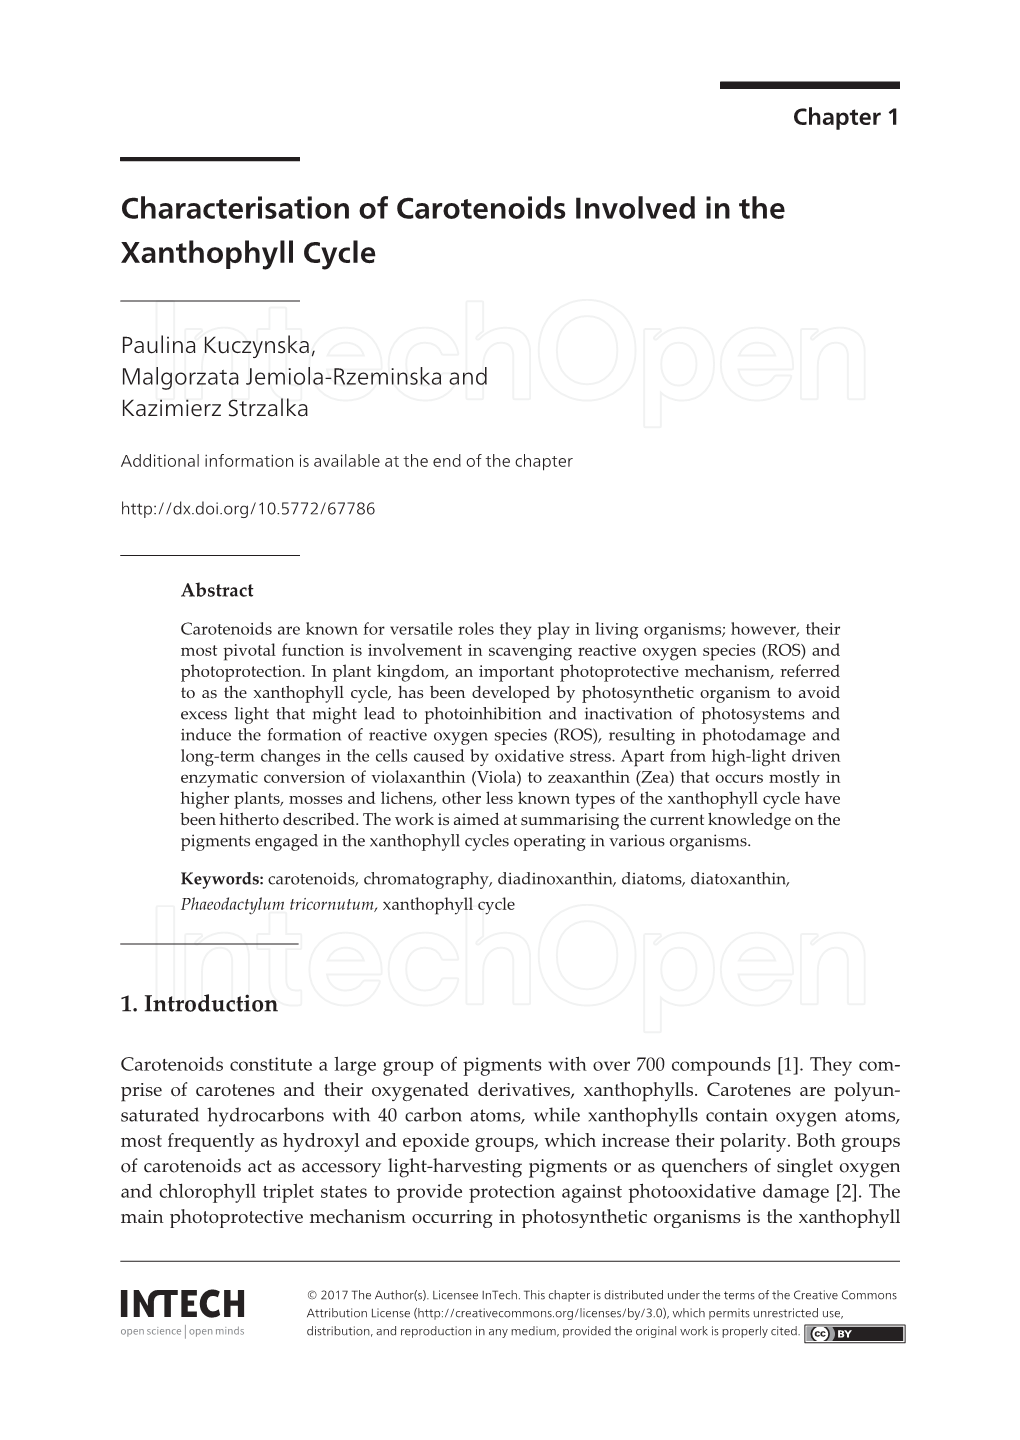 Characterisation of Carotenoids Involved in the Xanthophyll Cycle